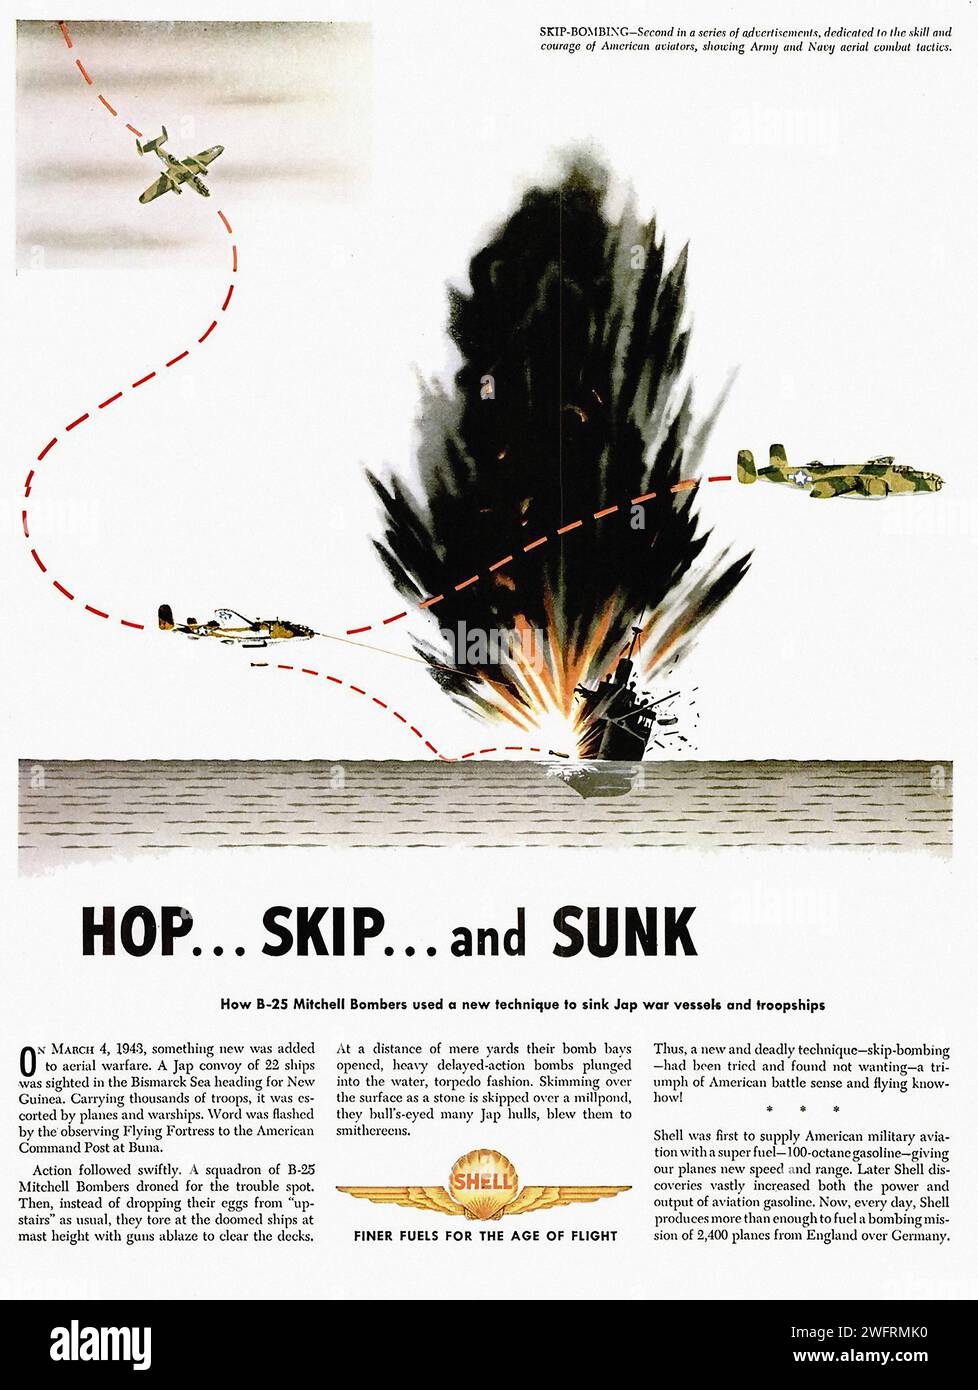 “HOP… SKIP… and SUNK”  This is a U.S. propaganda poster from World War II. The poster is in a graphic style and shows a fleet of B-25 Mitchell Bombers flying over a sinking ship. The text “HOP… SKIP… and SUNK” is written in large capital letters at the top of the poster. The background is a light blue sky with clouds. The bombers are shown in a formation with red dotted lines trailing behind them. - American (U.S.) advertising, World War II era Stock Photo